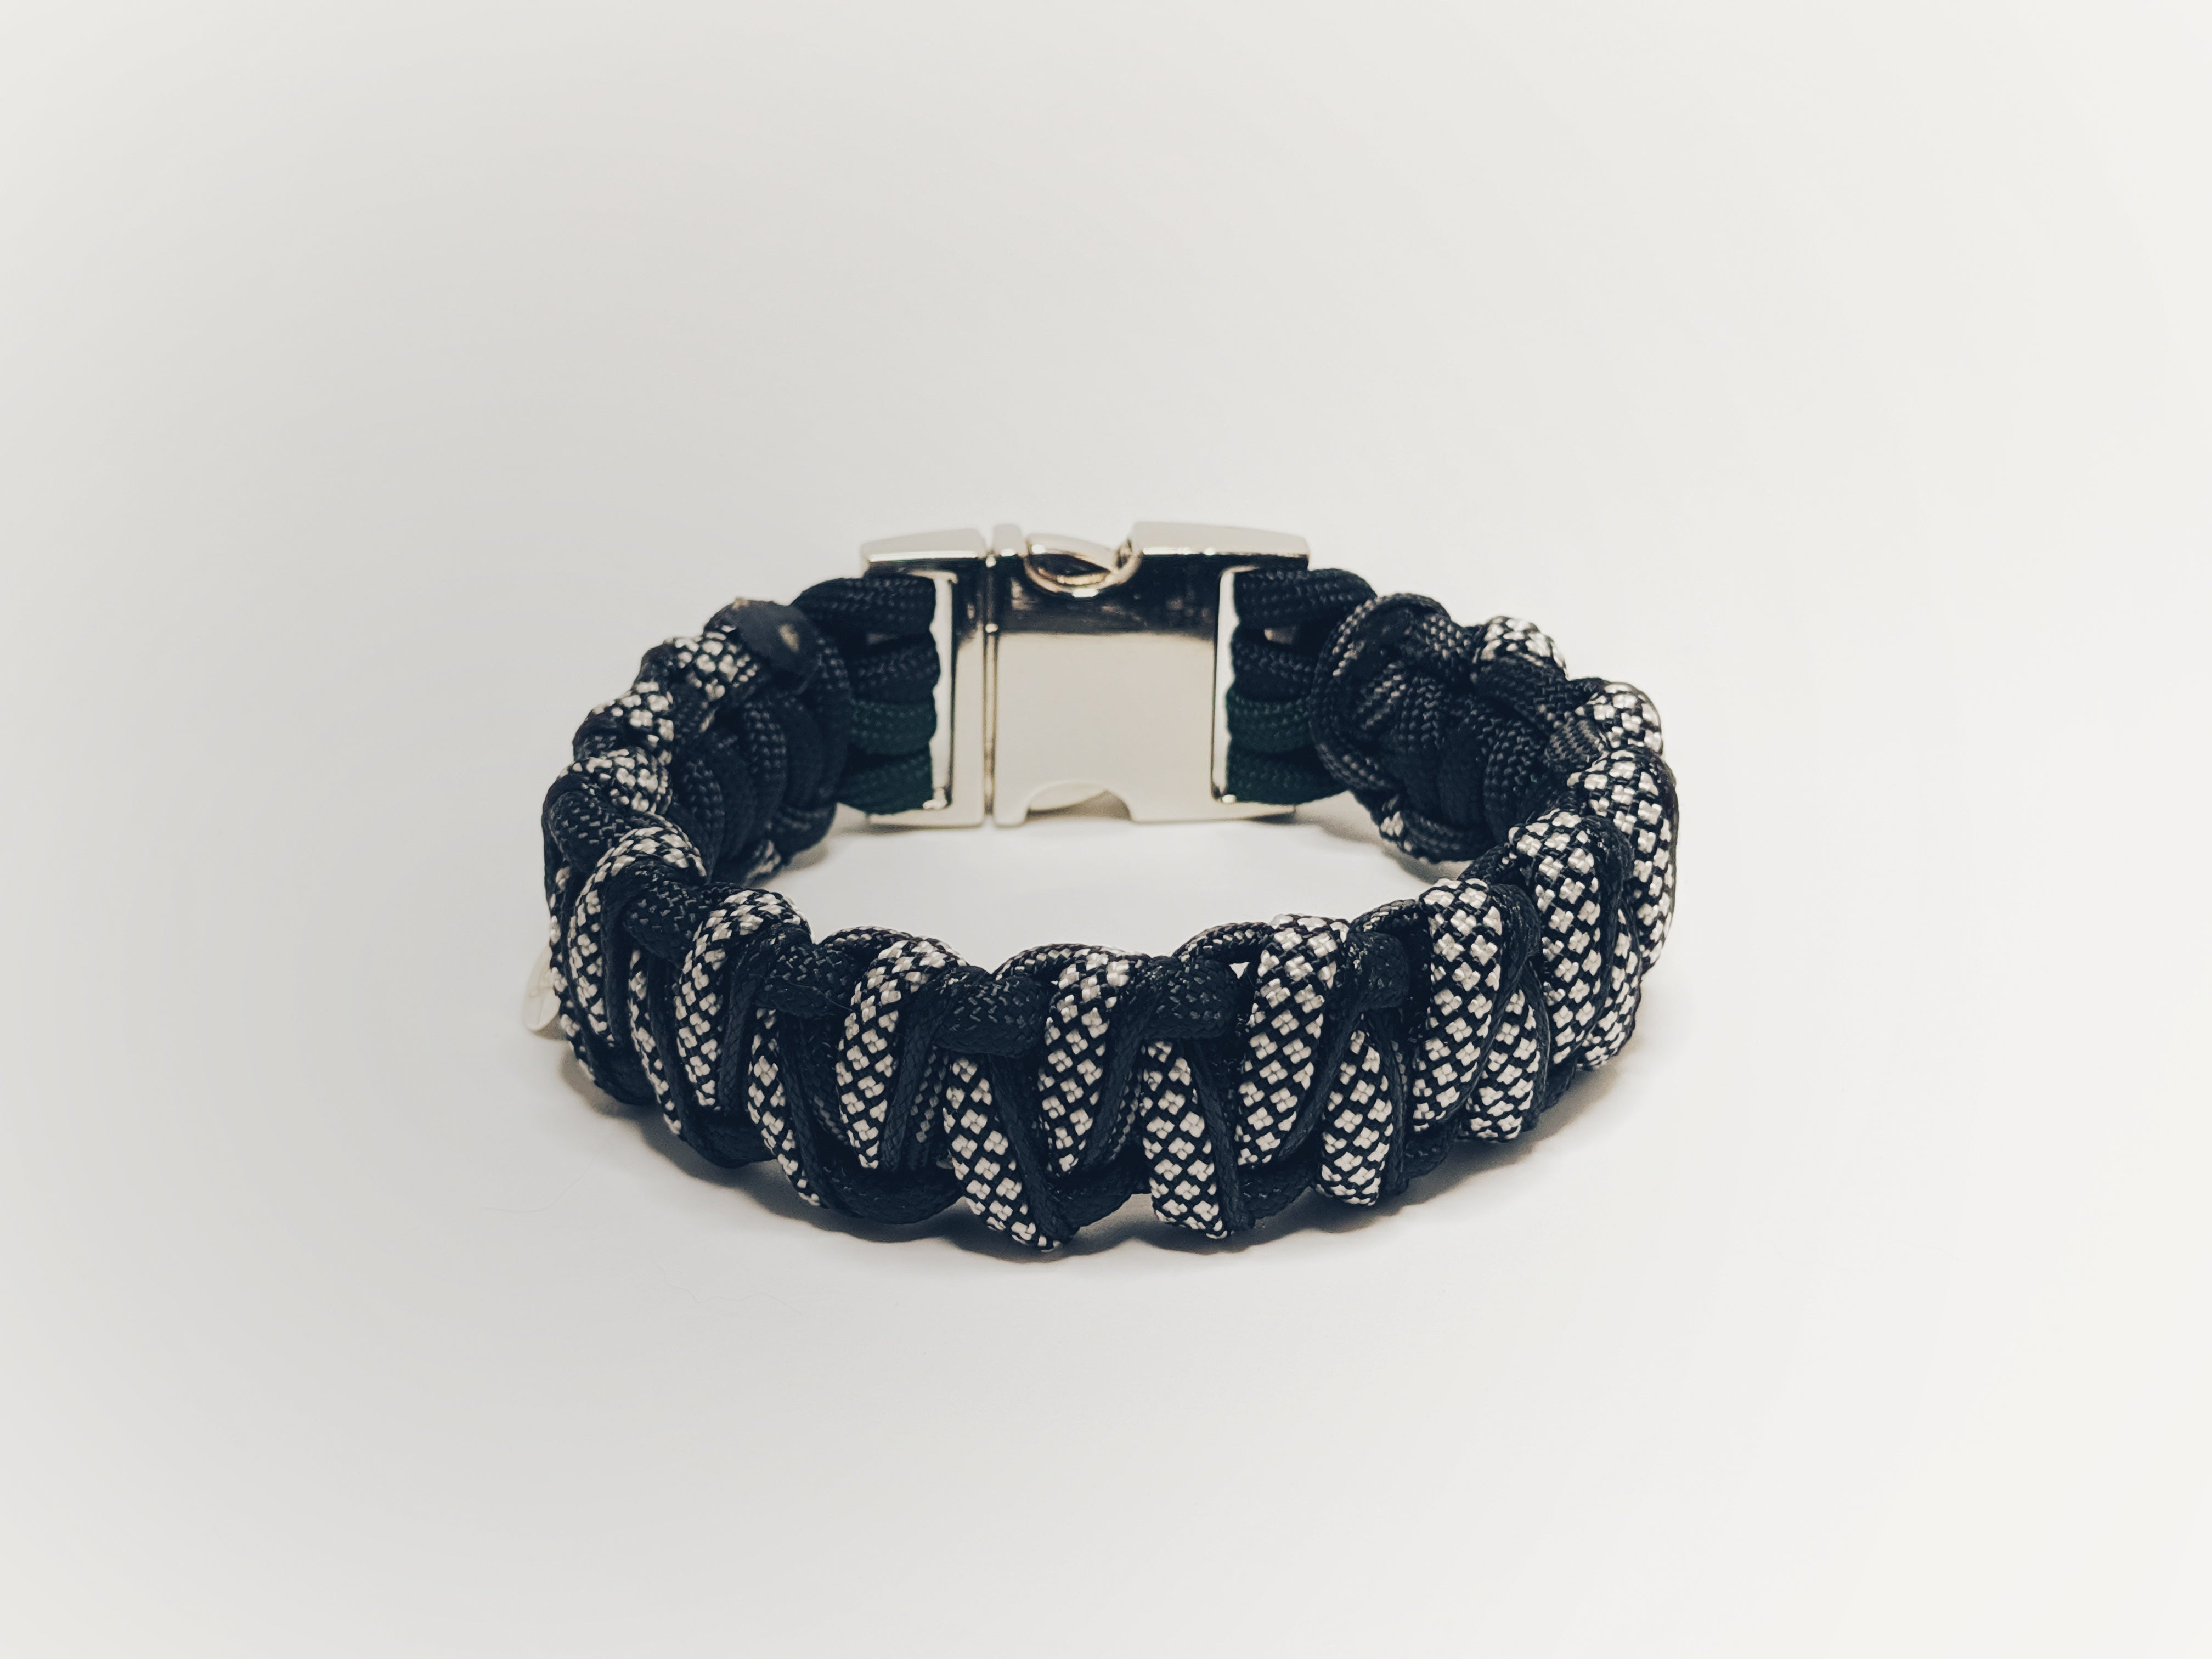 Adjustable 550 Paracord Cord Bracelet For Camping And Hiking Essential  Outdoor Survival Tool From Sarahzhang2018, $2.41 | DHgate.Com